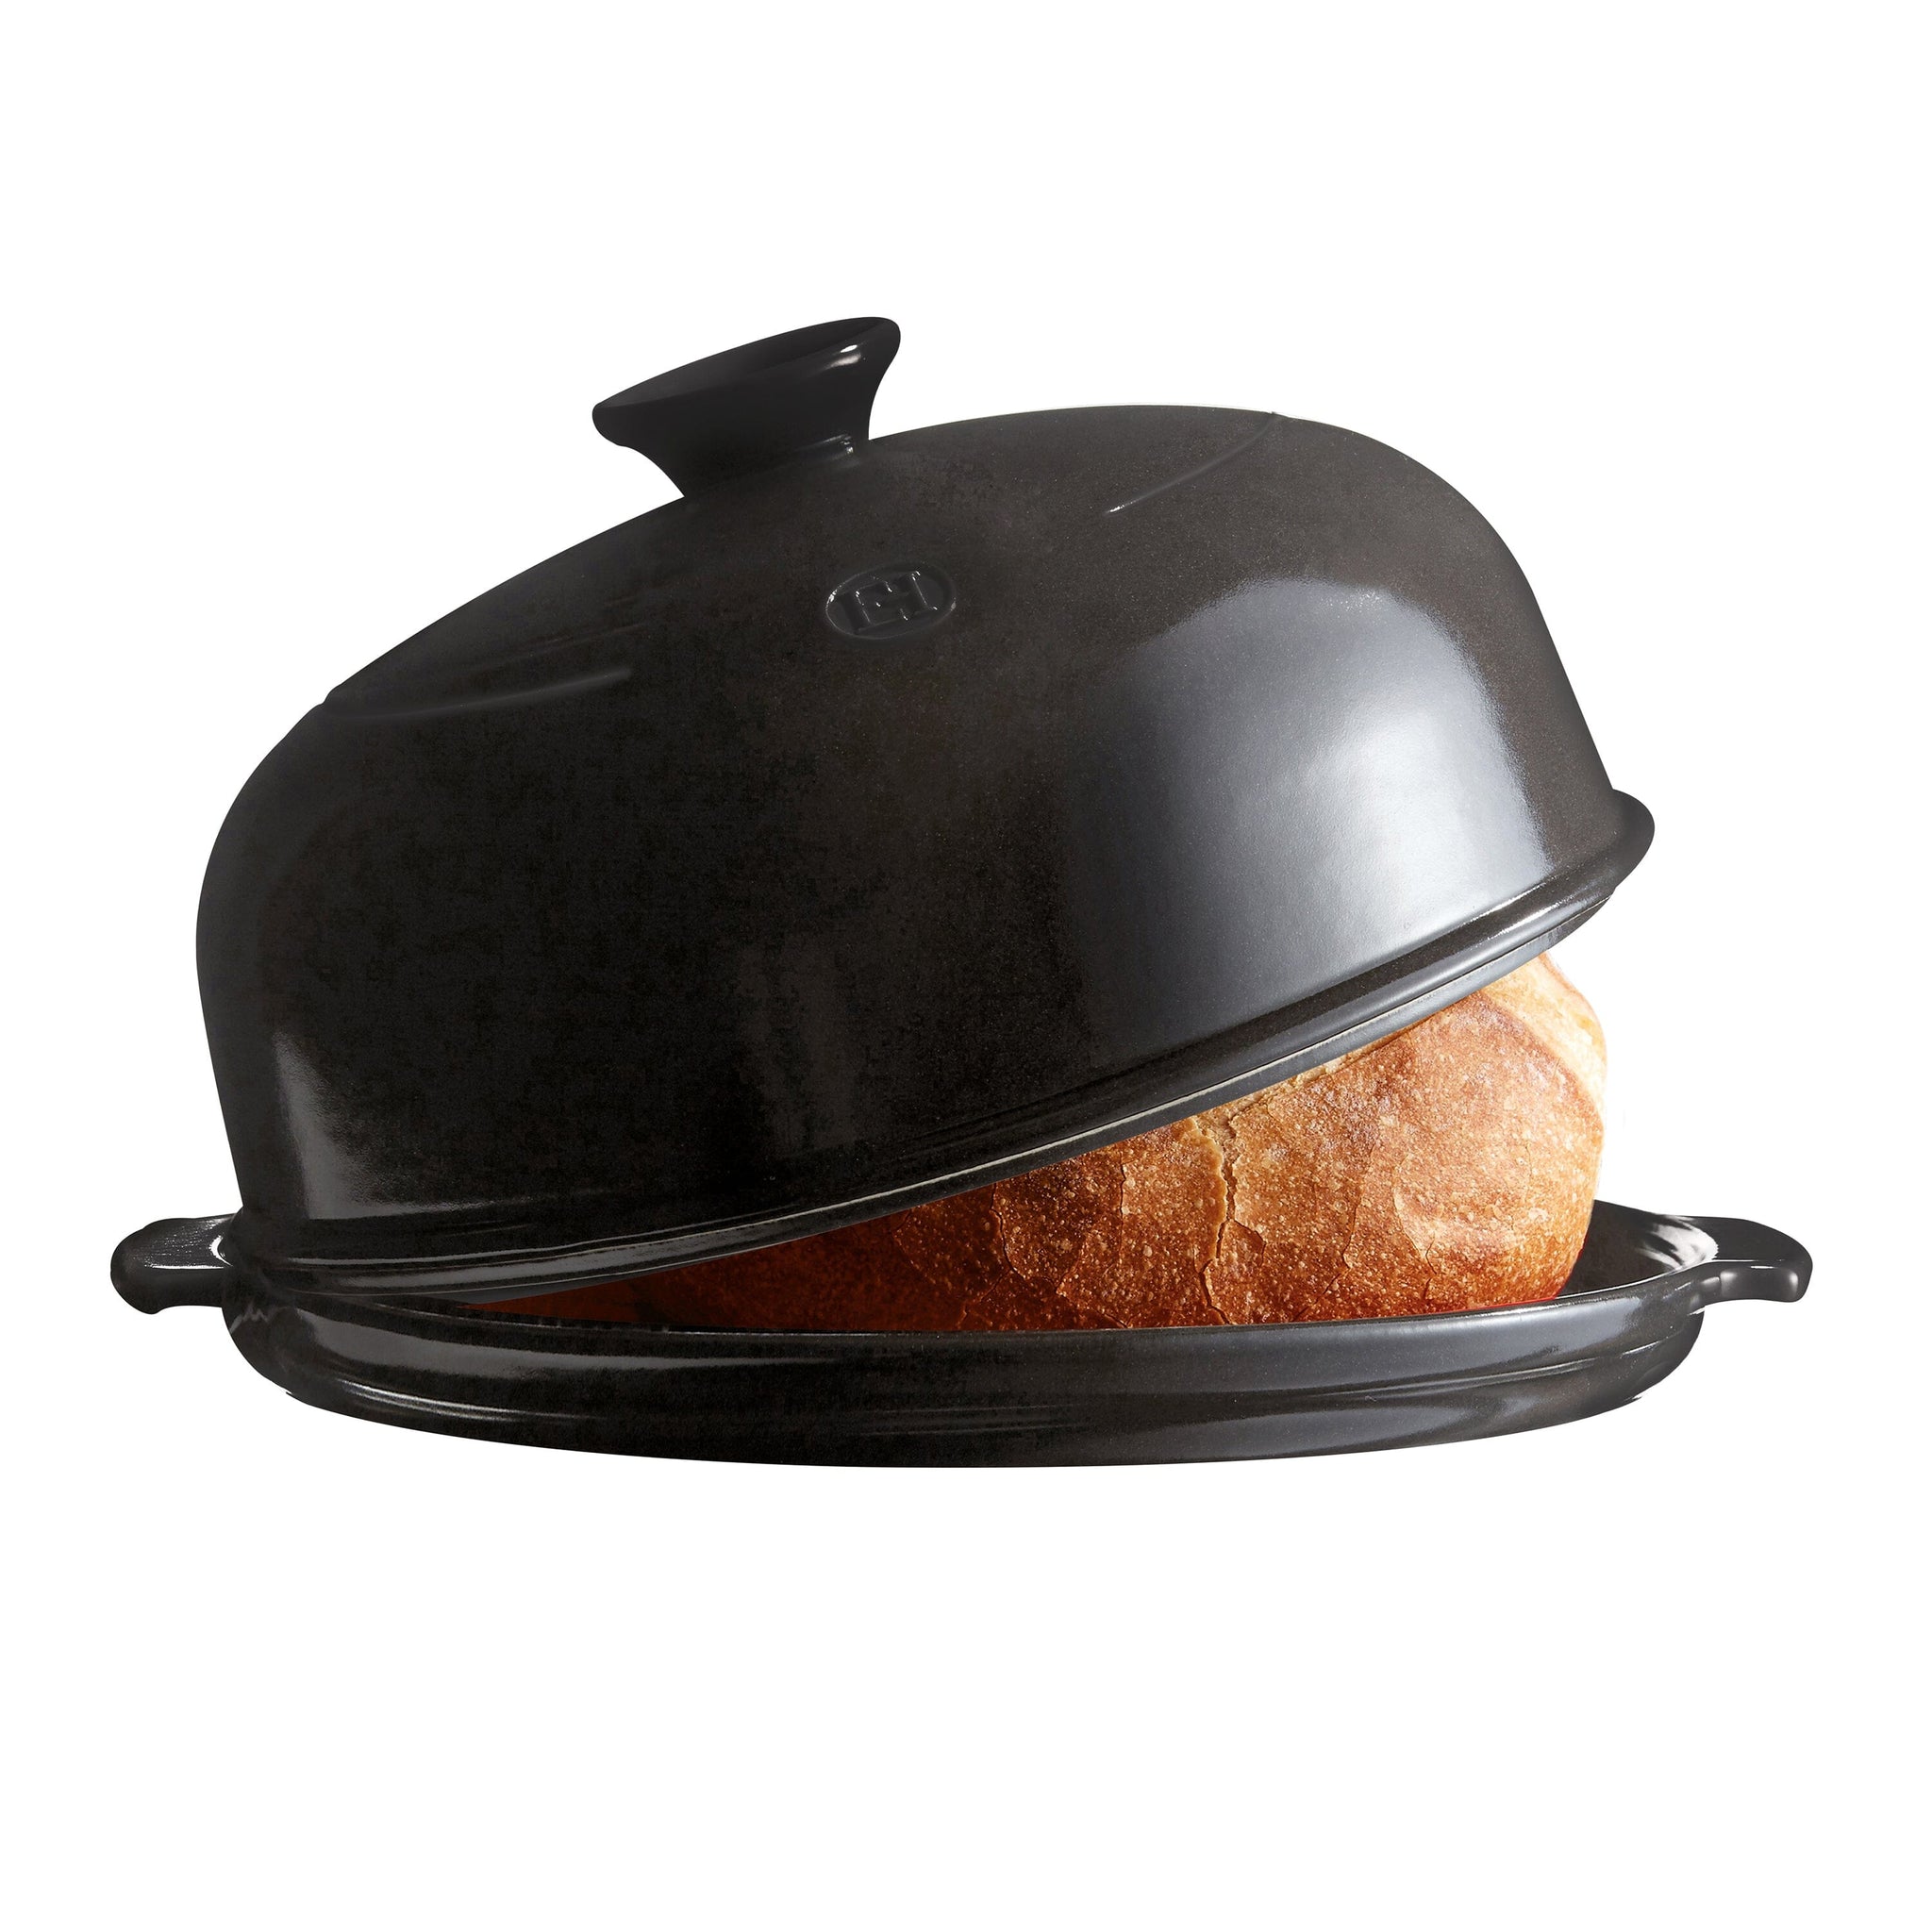 Emile Henry Bread Cloche - Charcoal